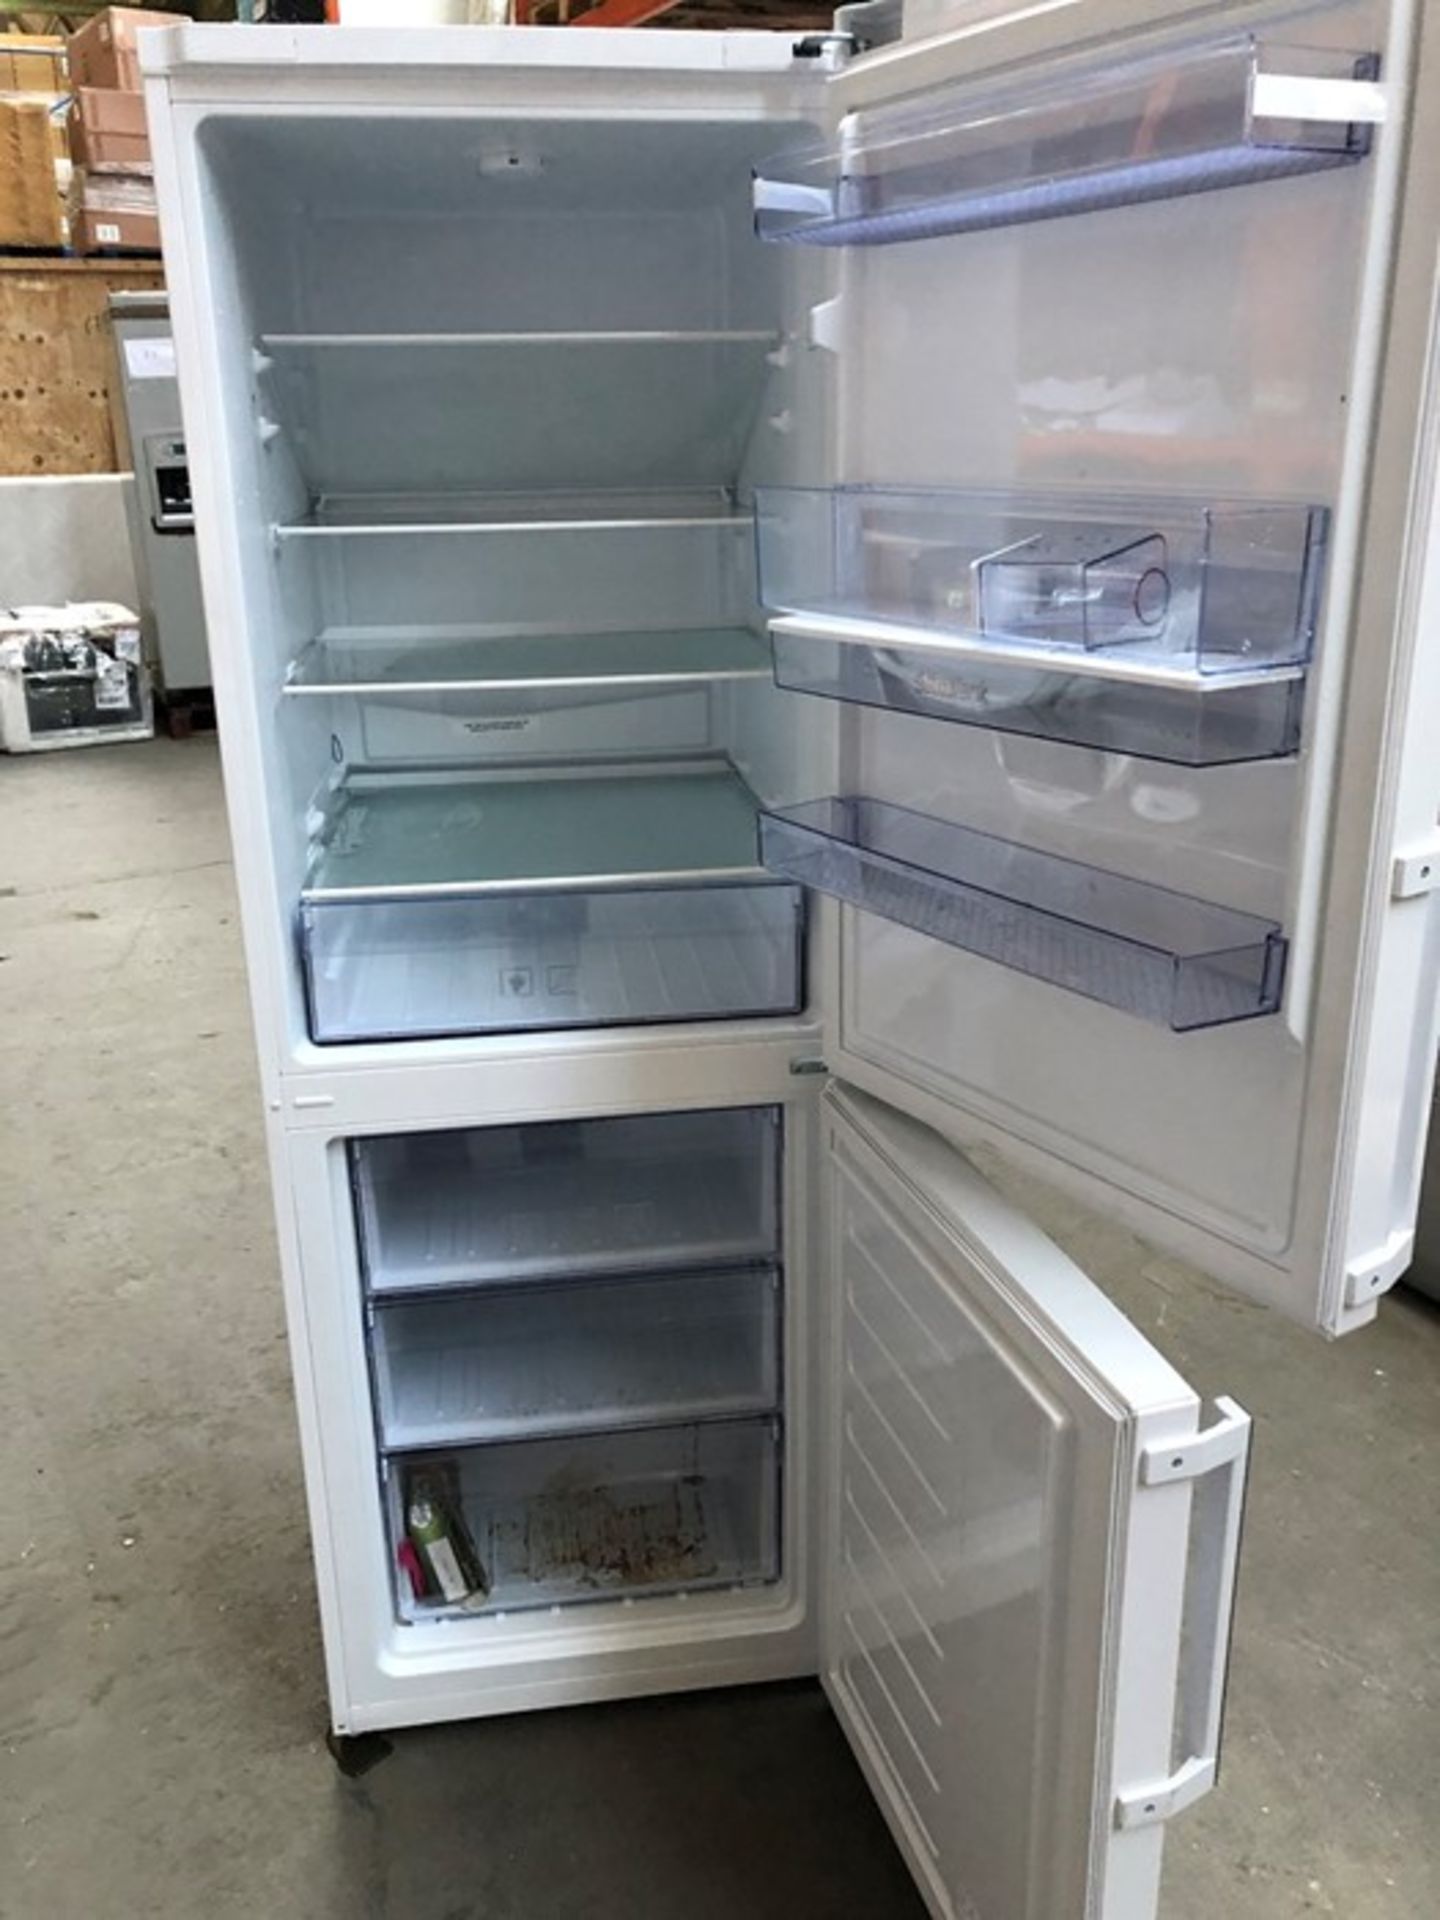 1 BEKO FROST FREE FRIDGE FREEZER IN WHITE - CFP1675DW / RRP £349 / CONDITION REPORT: USED, NEEDS - Image 2 of 3